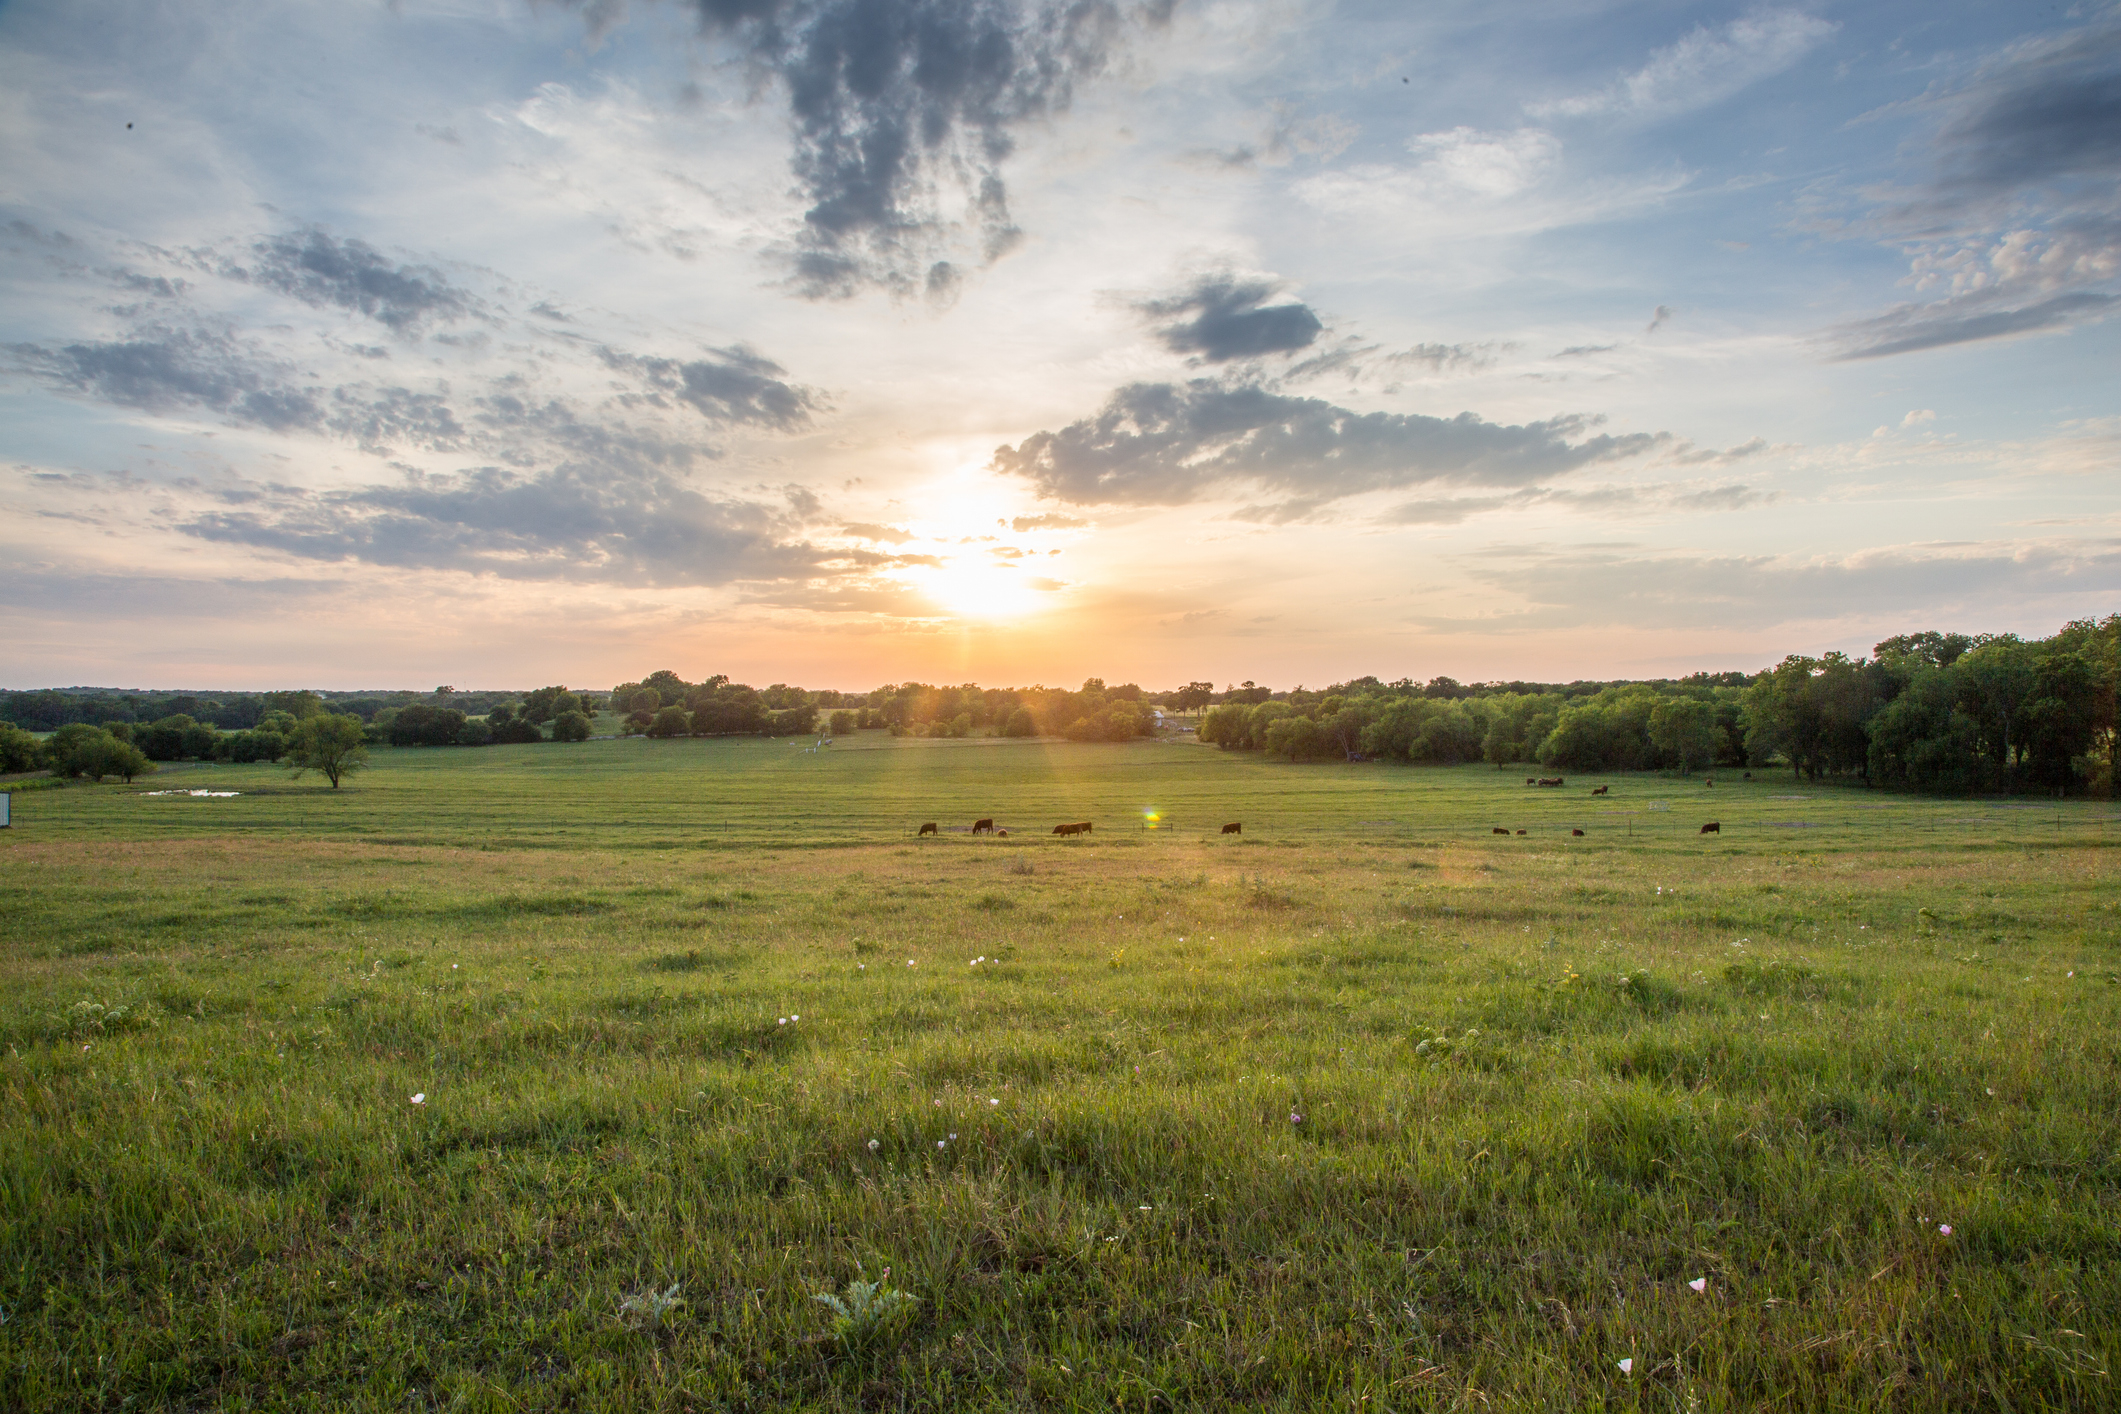 Sunset over a peaceful pasture with scattered cows grazing